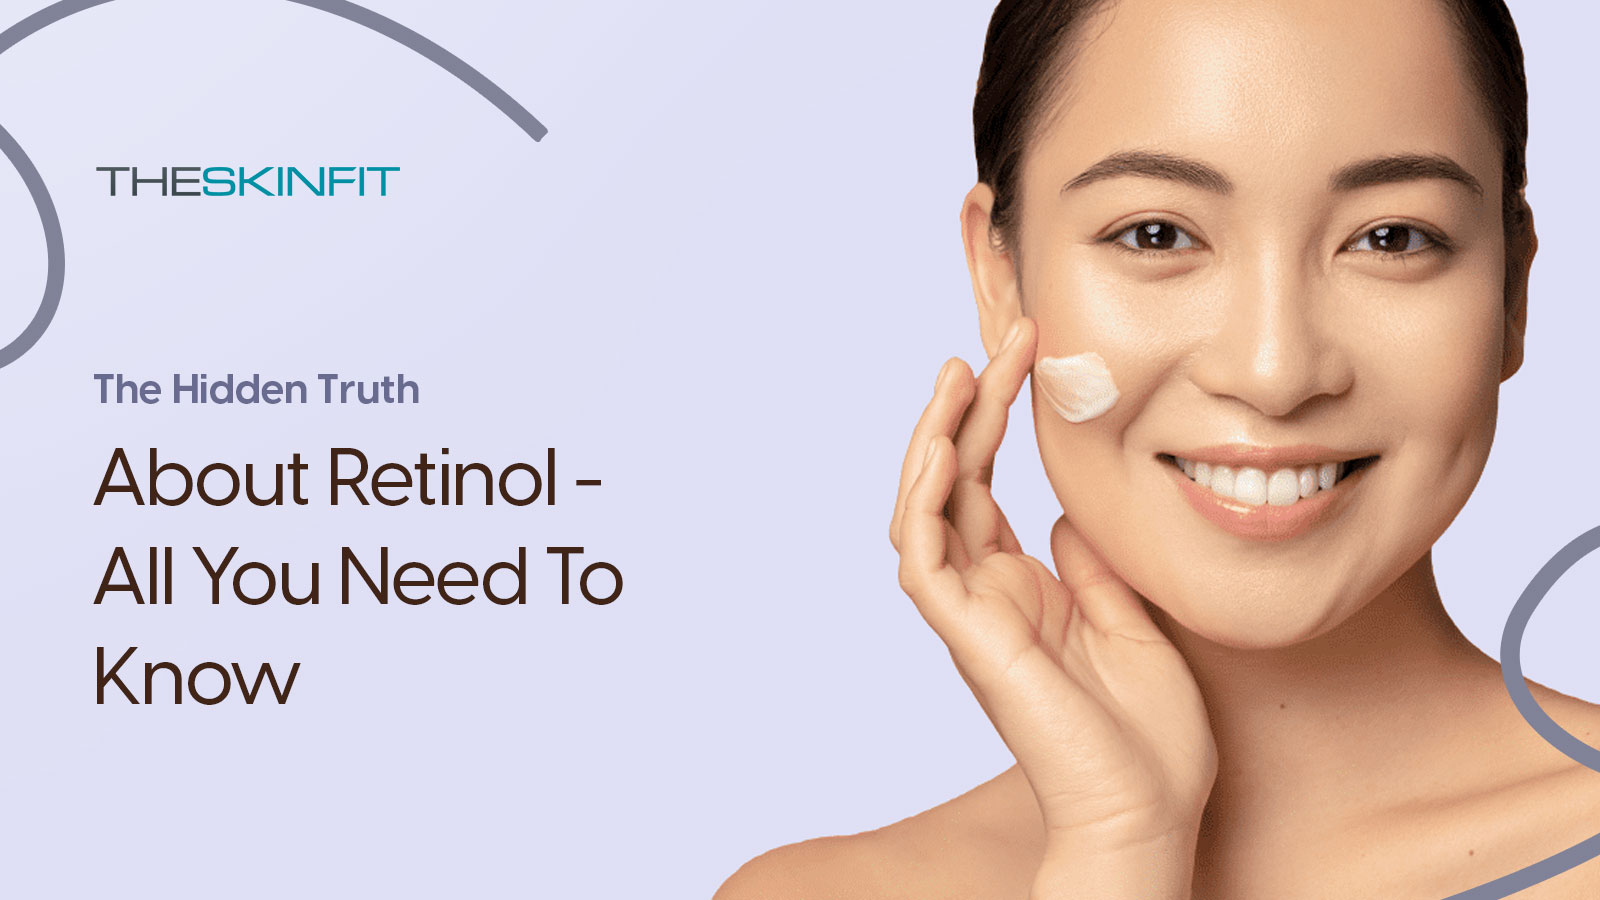 The Hidden Truth About Retinol - All You Need To Know